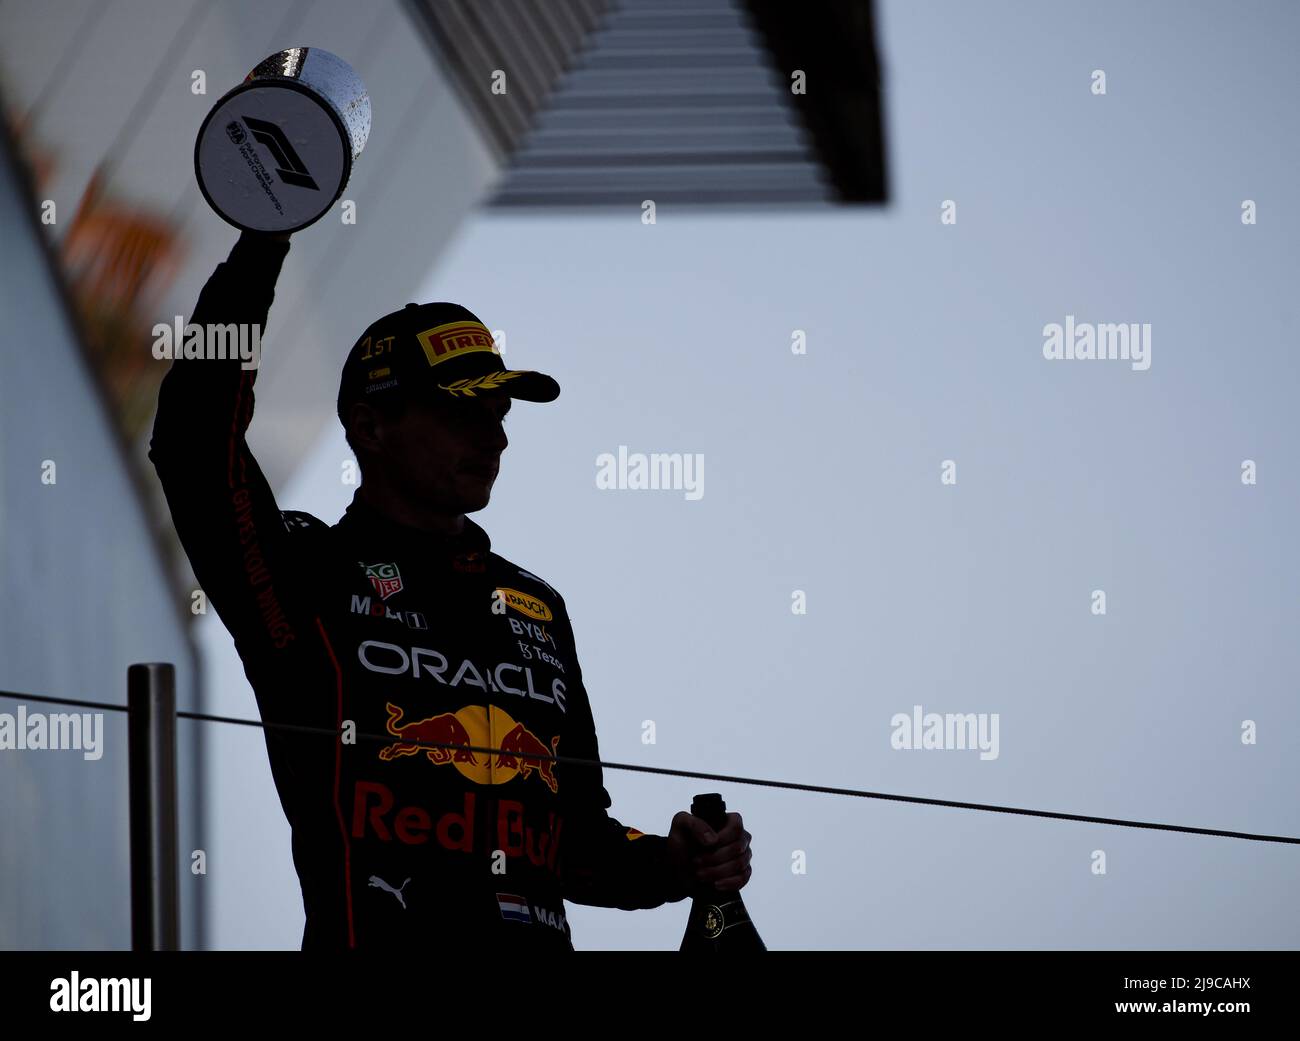 BARCELONA - Max Verstappen (Red Bull Racing) on the podium after the F1 Grand Prix of Spain at Circuit de Barcelona-Catalunya on May 22, 2022 in Barcelona, Spain. REMKO DE WAAL Stock Photo